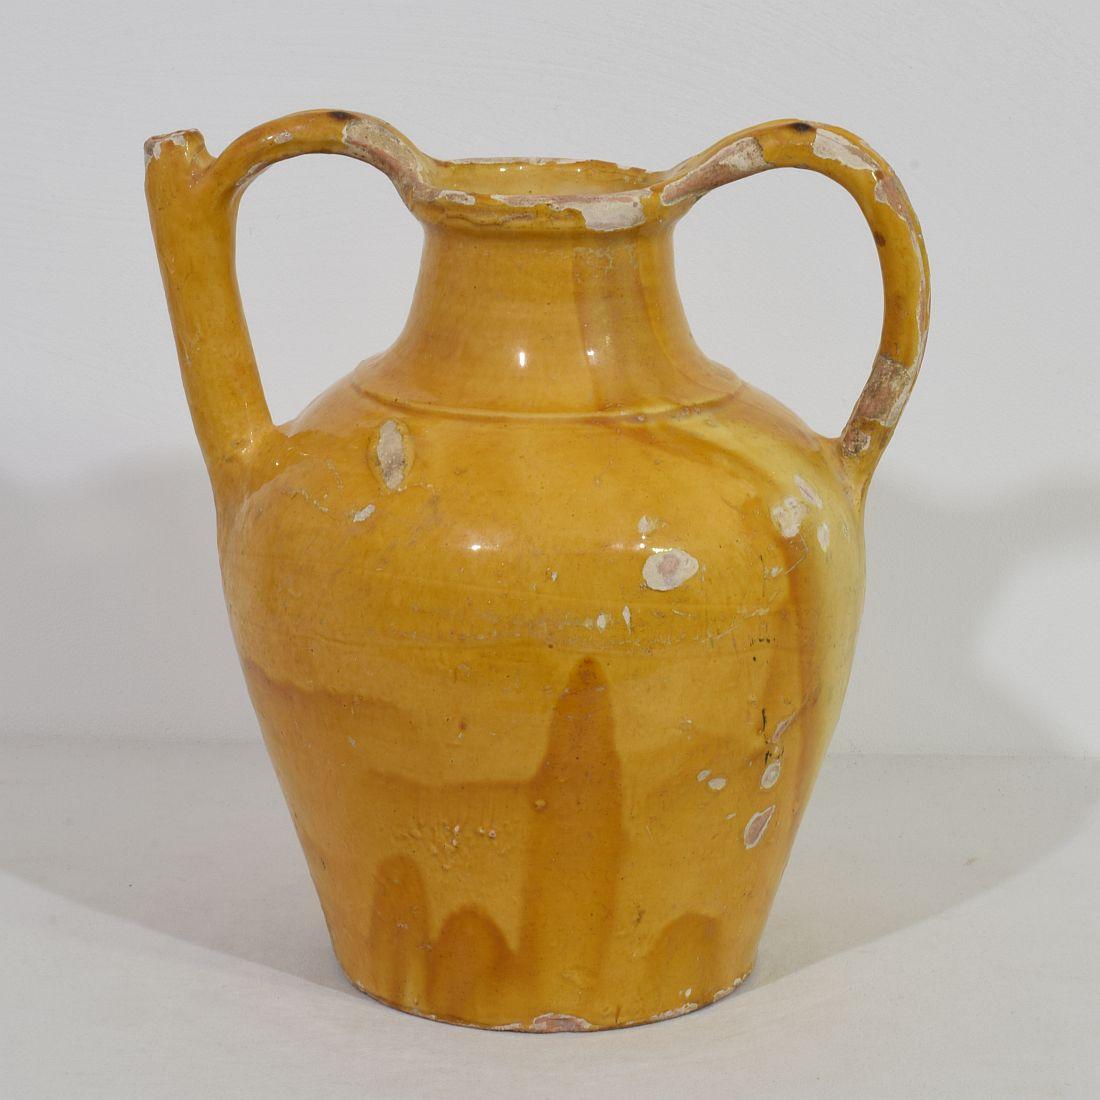 Large 19th Century French Yellow Glazed Terracotta Jug or Water Cruche, 'Orjol' For Sale 2